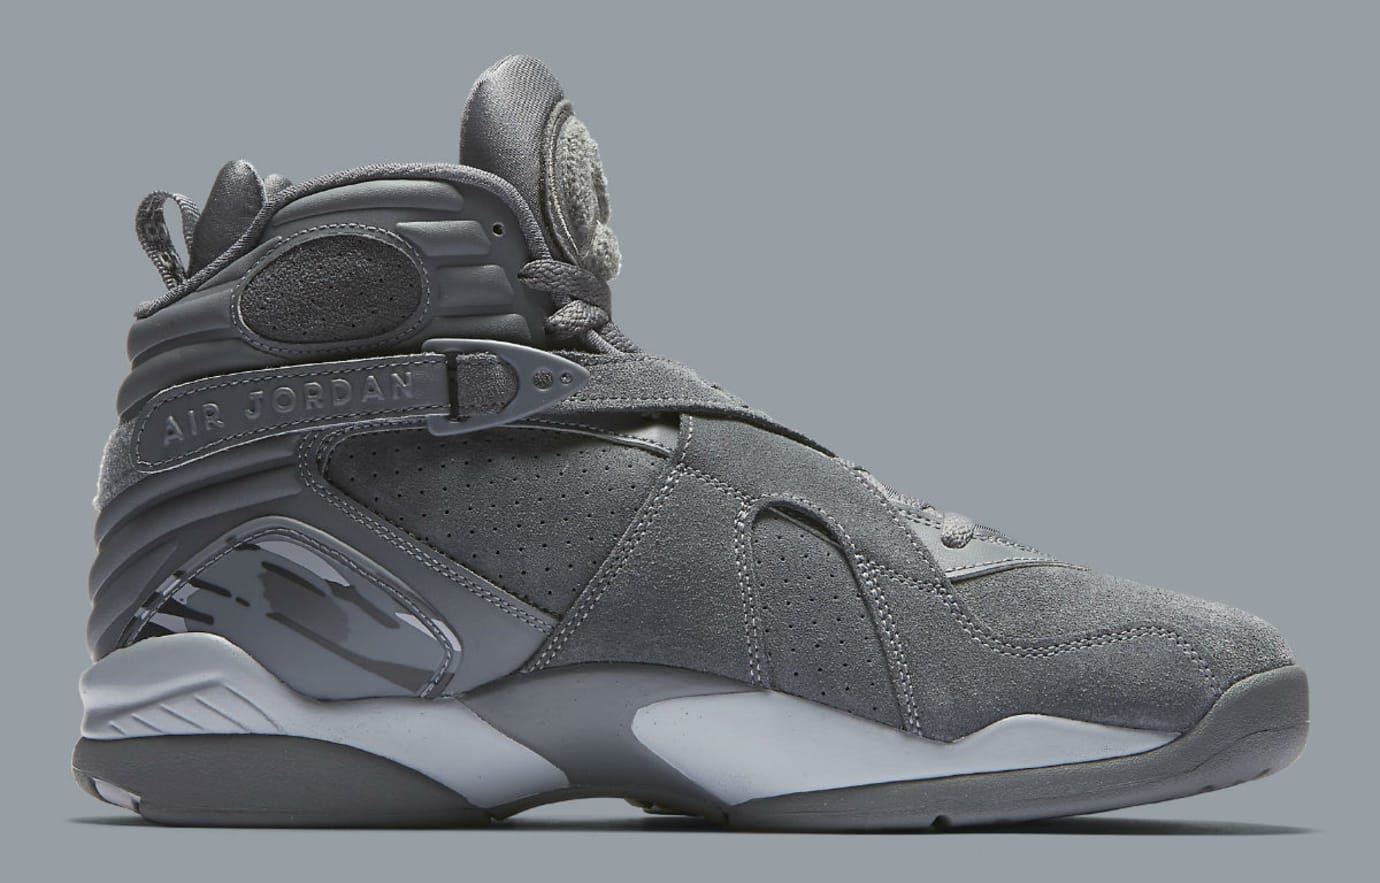 Air 8 VIII Cool Grey Date 305381-014 | Sole Collector